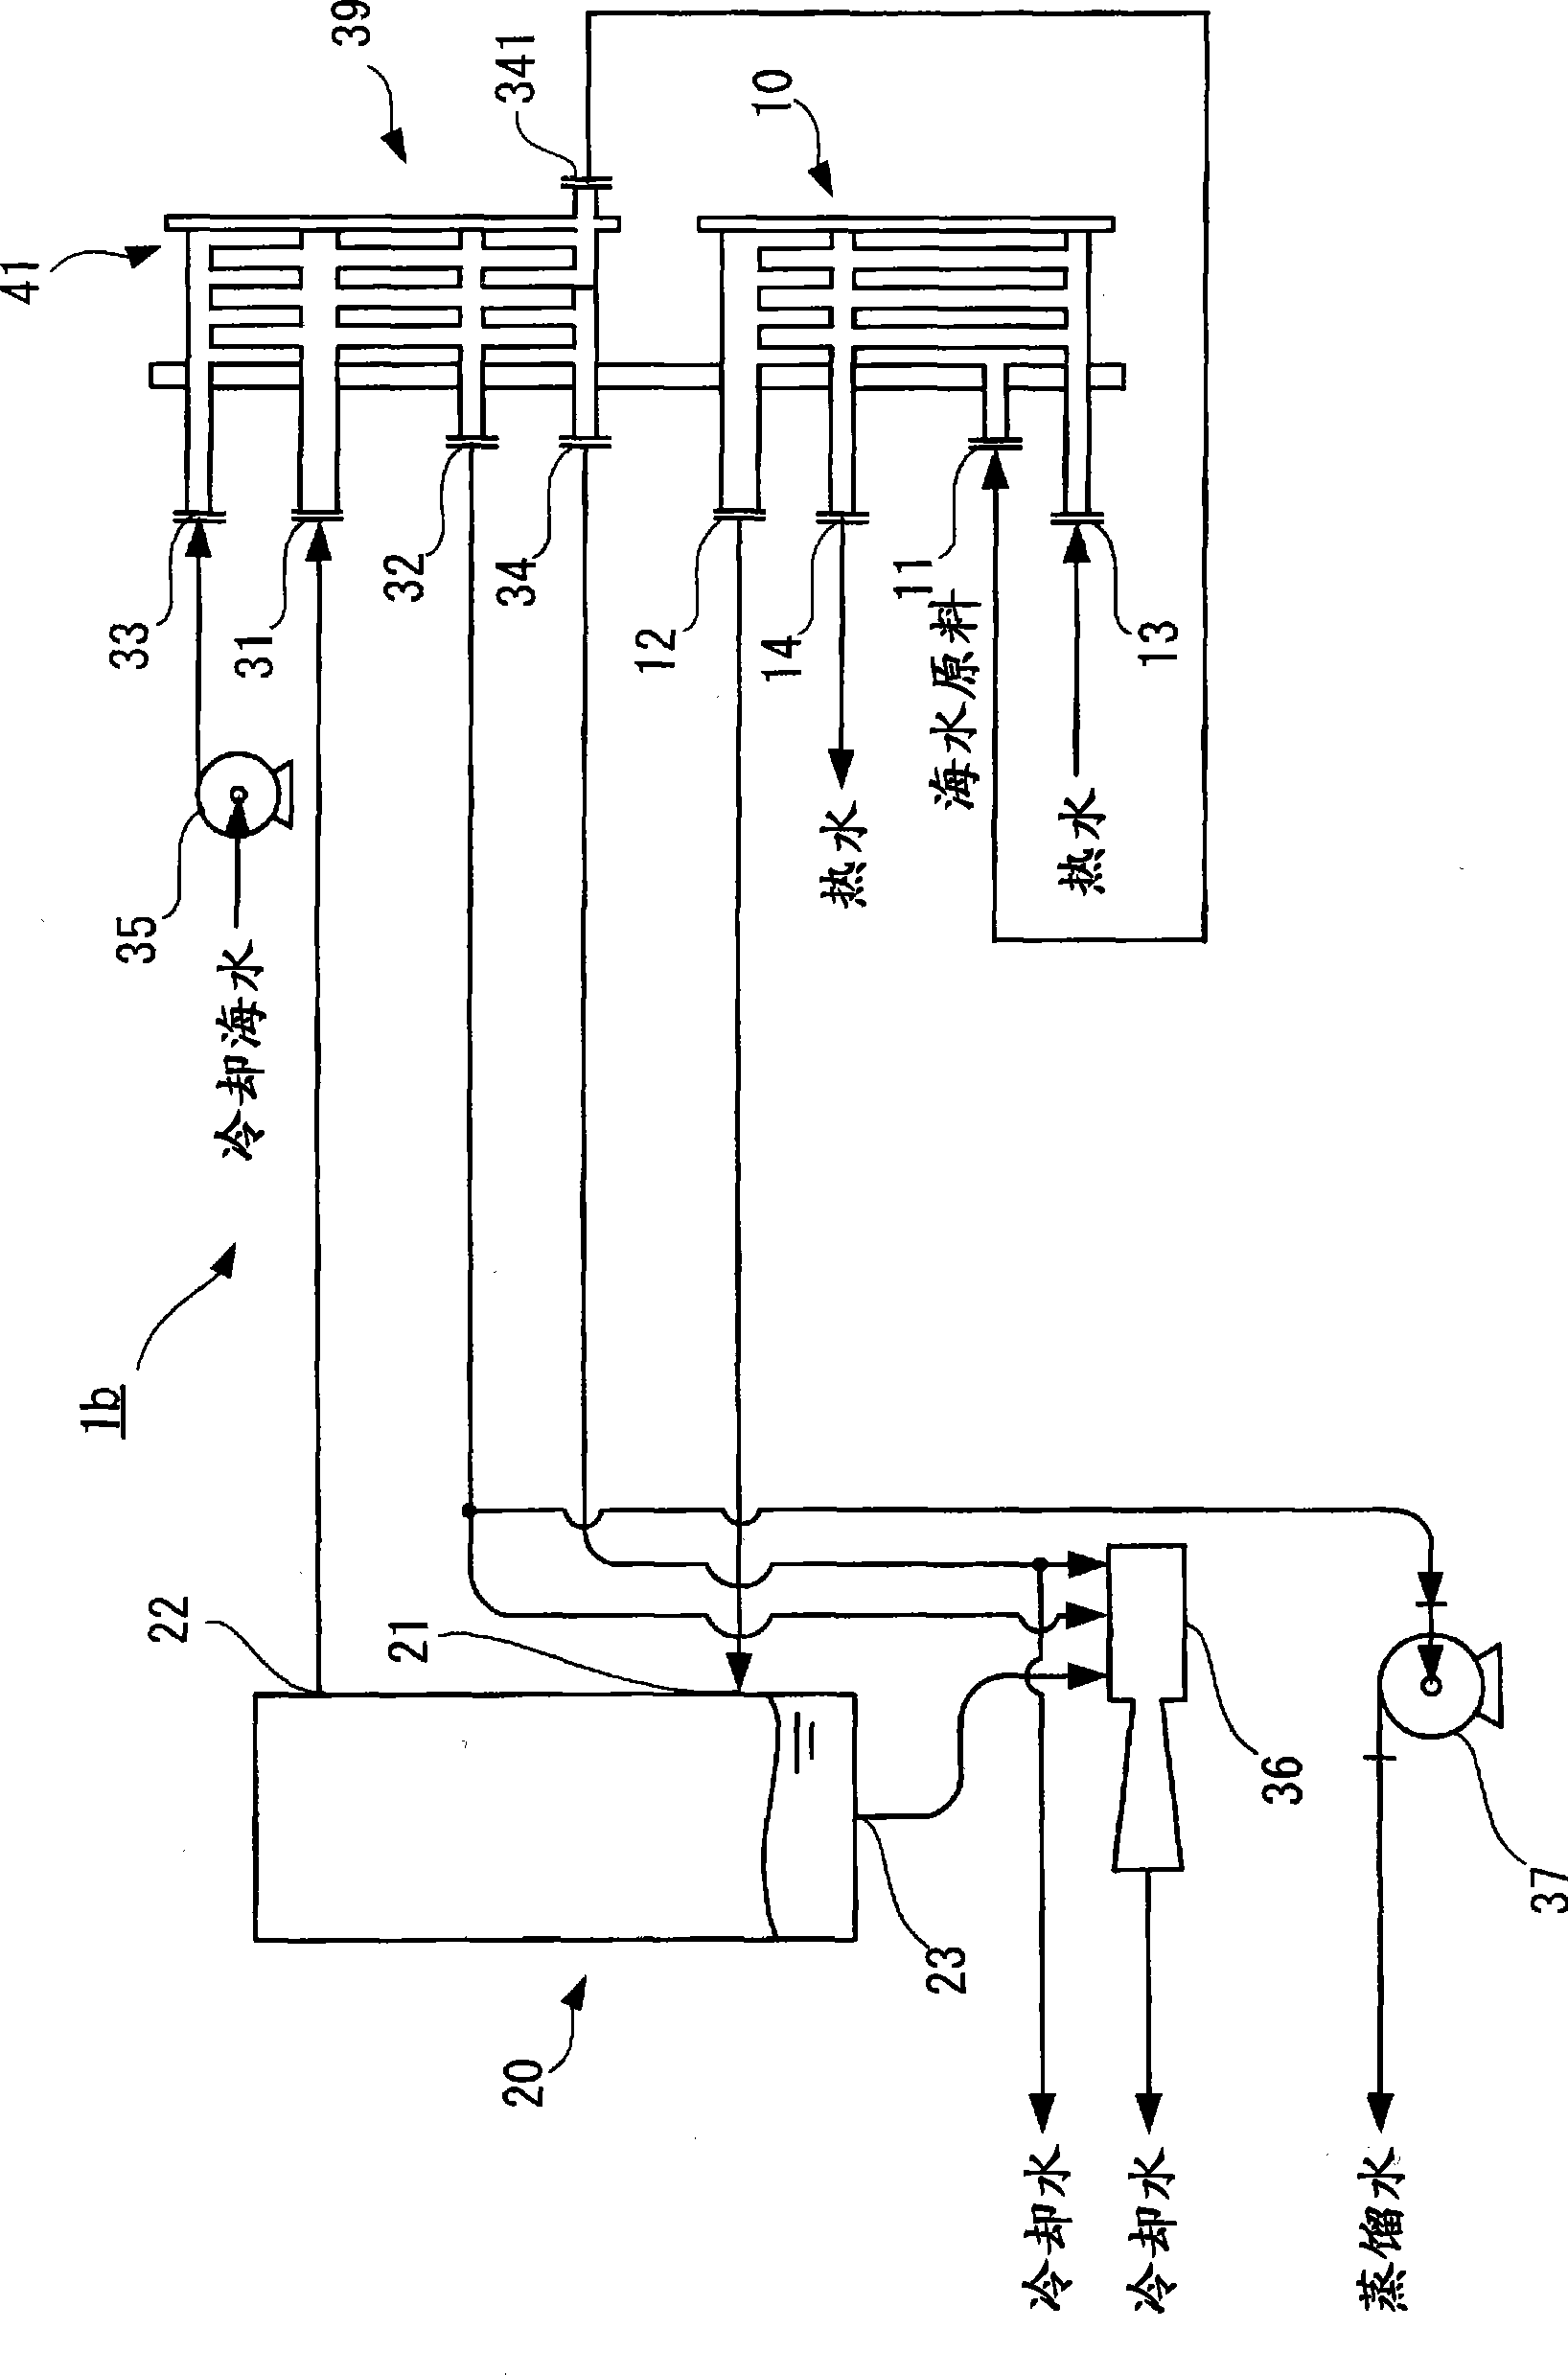 Plate type apparatus for producing fresh water